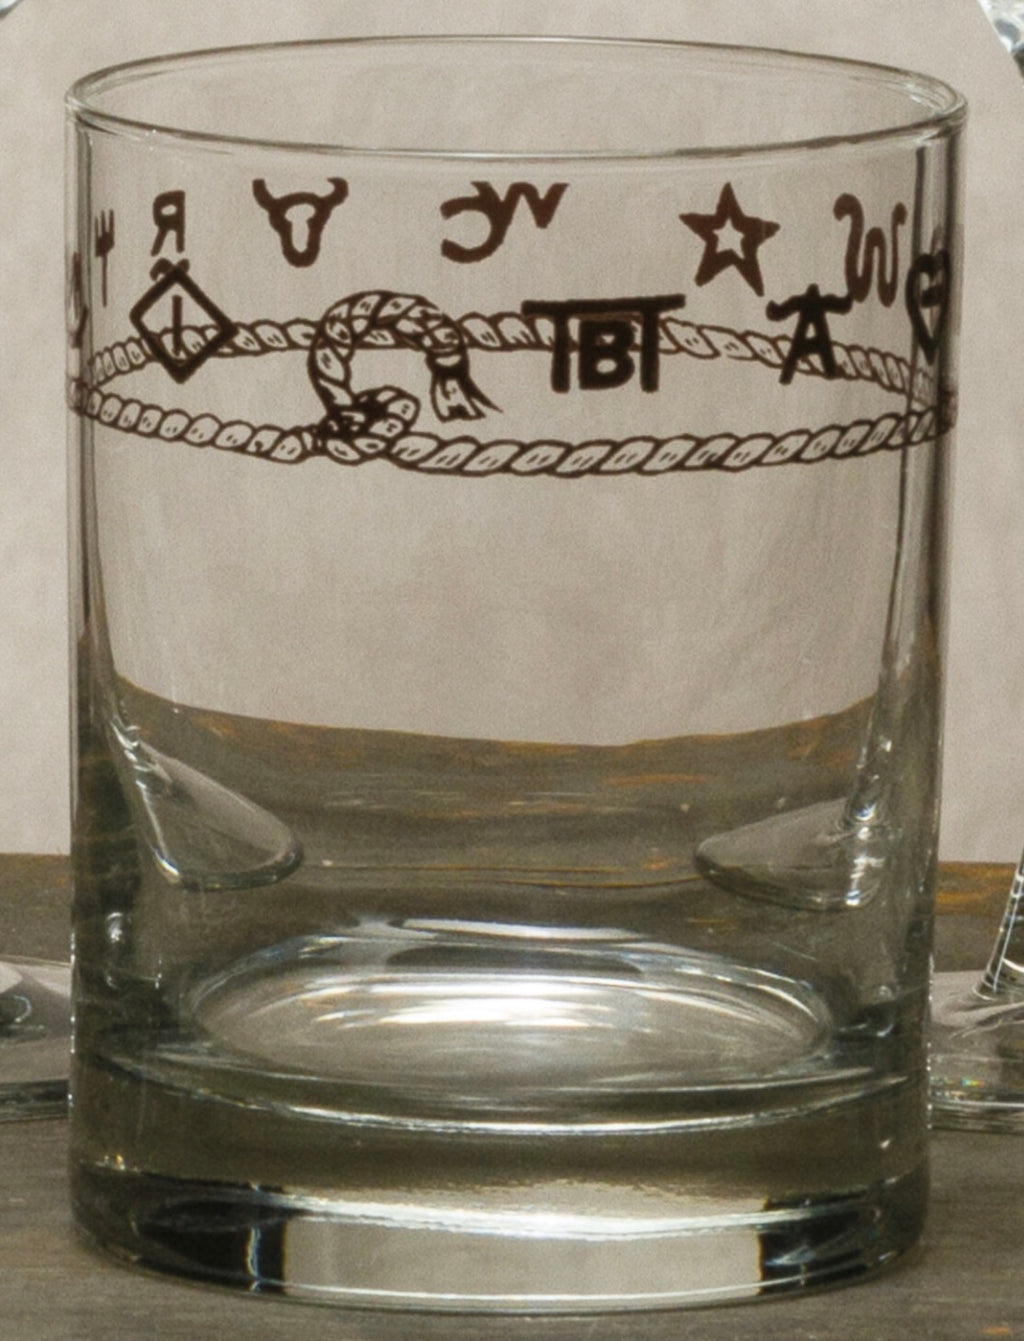 Ranch Home Brands Whiskey Glasses